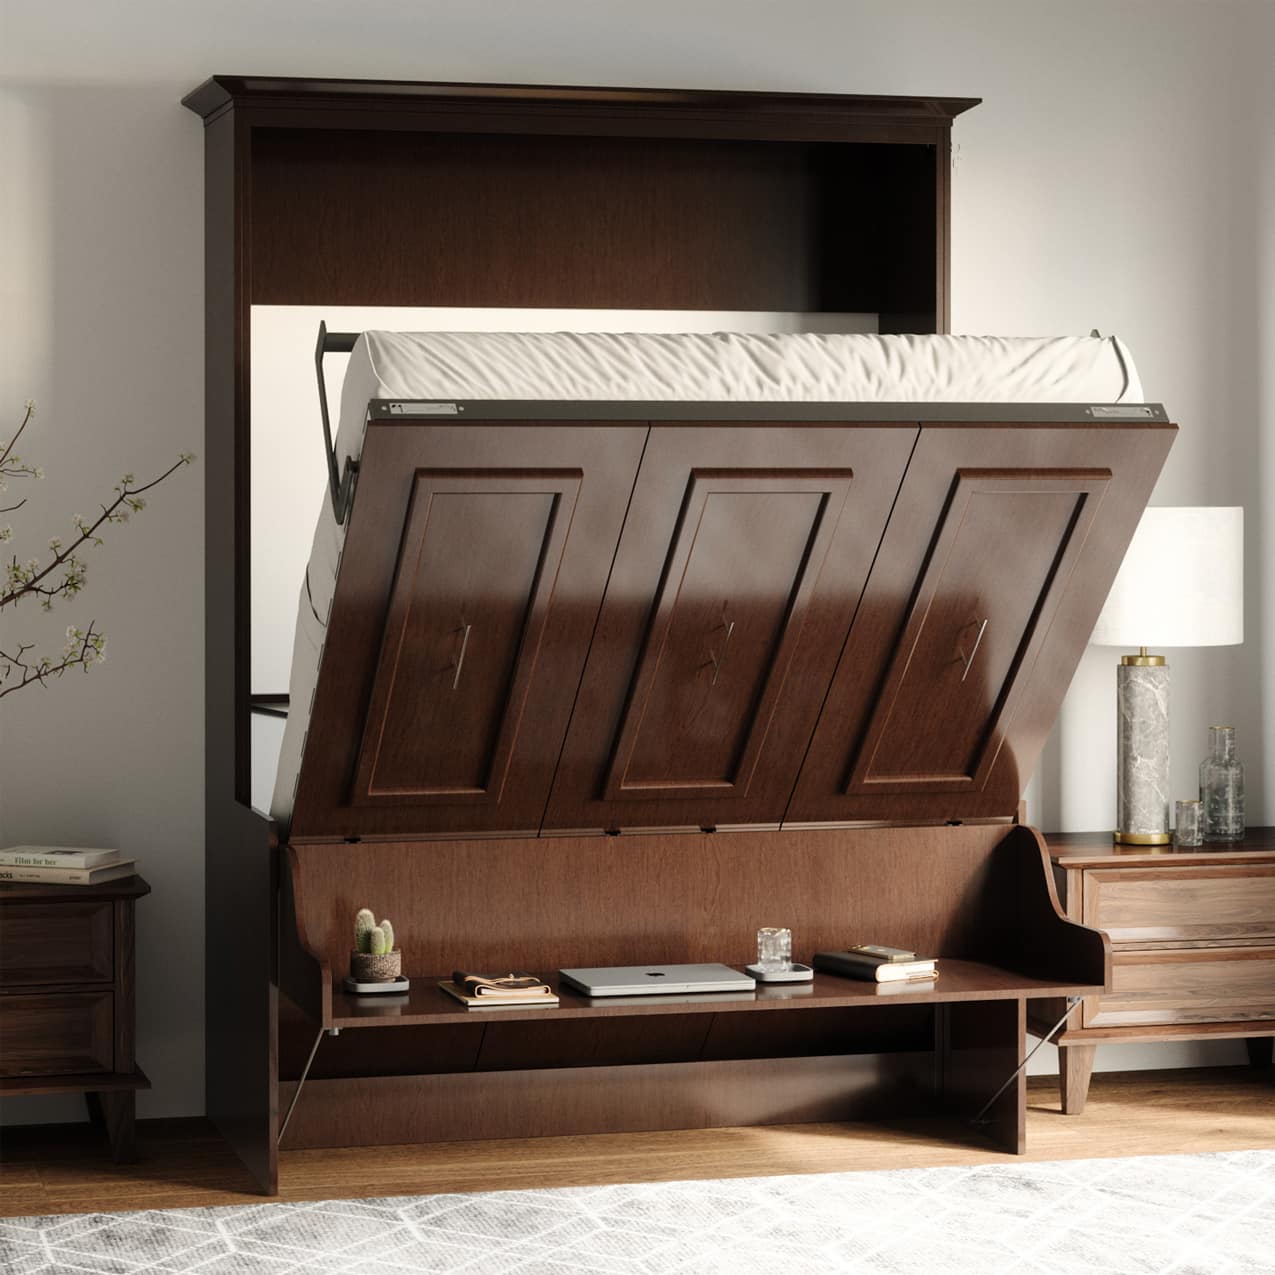 coventry queen murphy bed with desk bed open to 45 degrees to show the desk still flat hidden hideaway hide away hide-a-way diy murphy bed kit fold out pull down wall bed cabinet desk bed combo home office guest bed